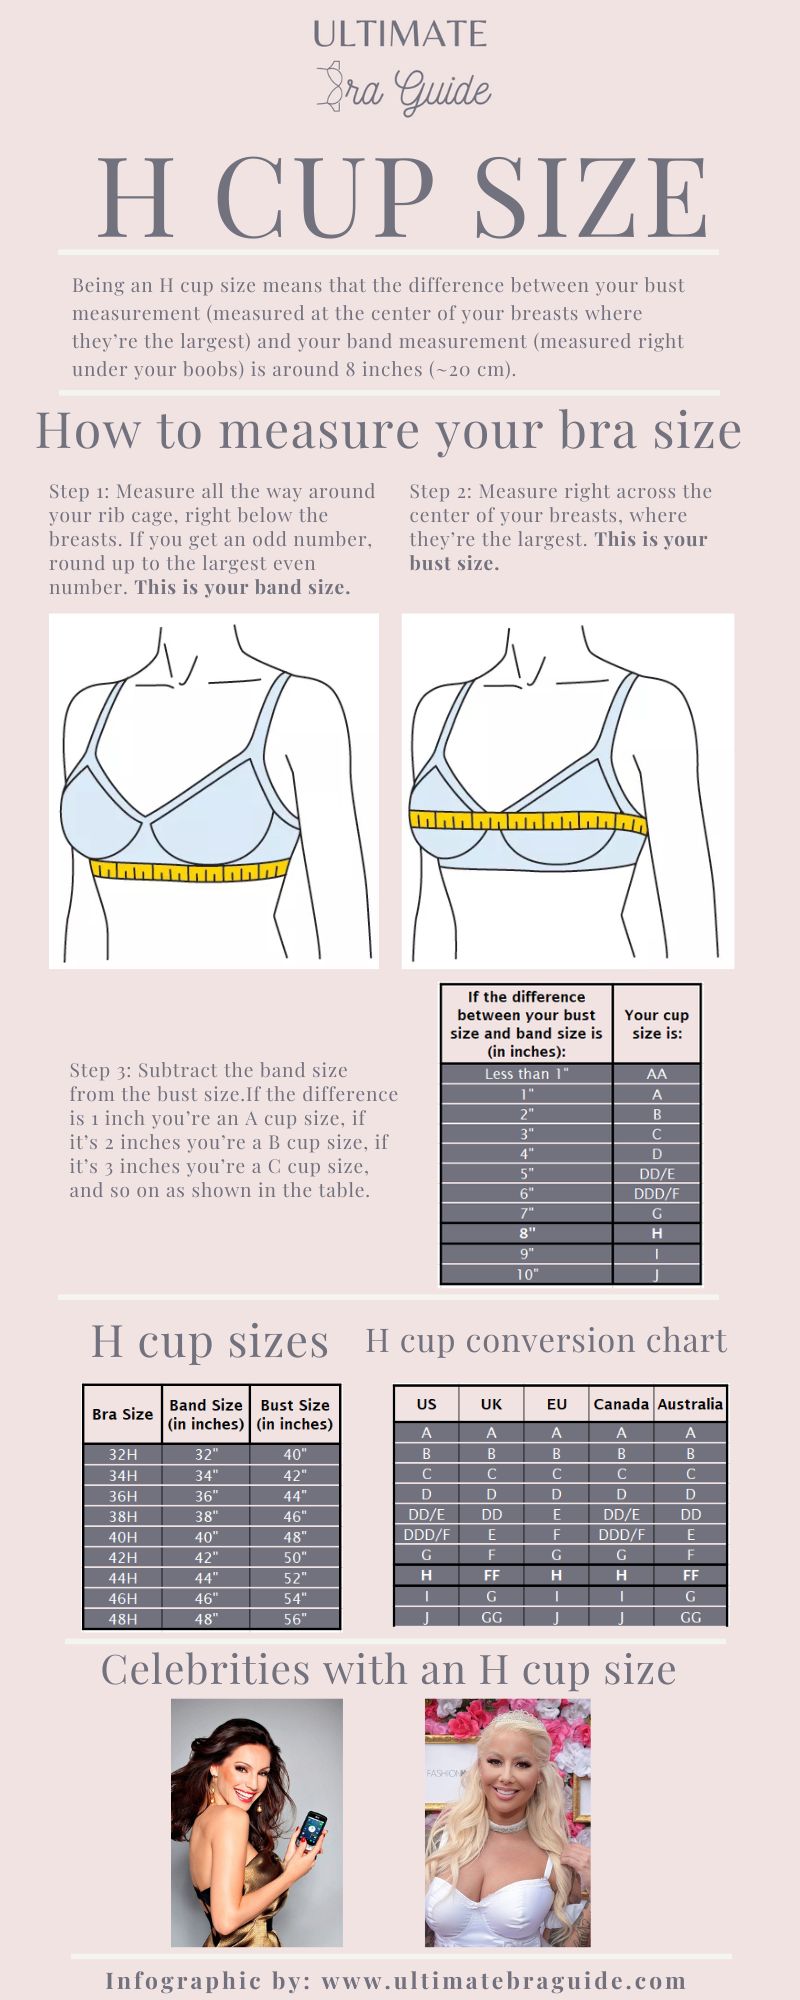 An infographic all about the H cup size - what it is, how to measure if you're H cup, a H cup conversion chart, H cup examples, and so on